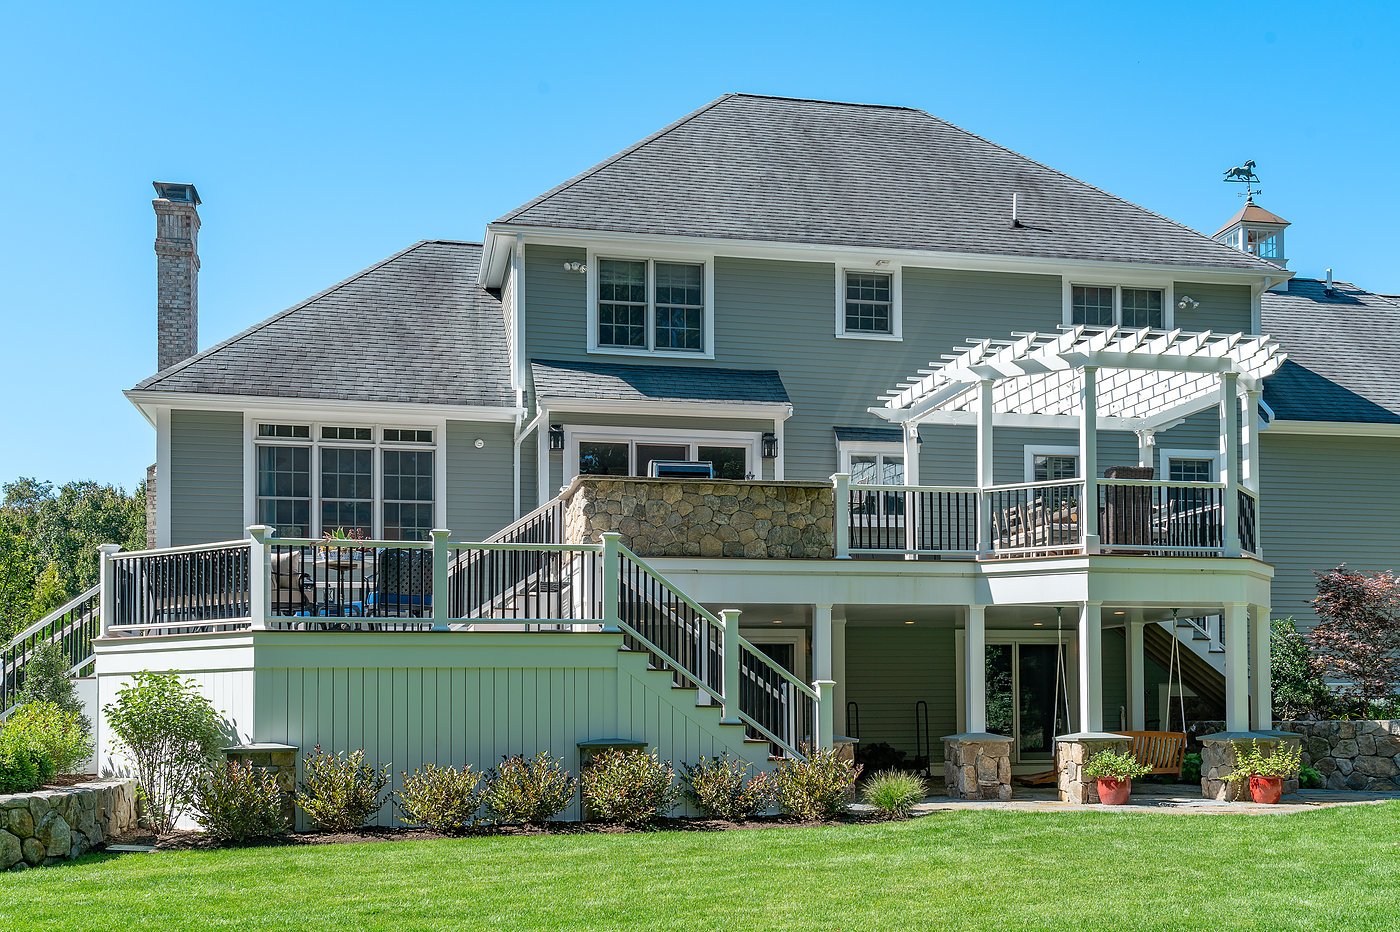 7 Deck Construction Details Every Homeowner Should Know for Quality and Safety